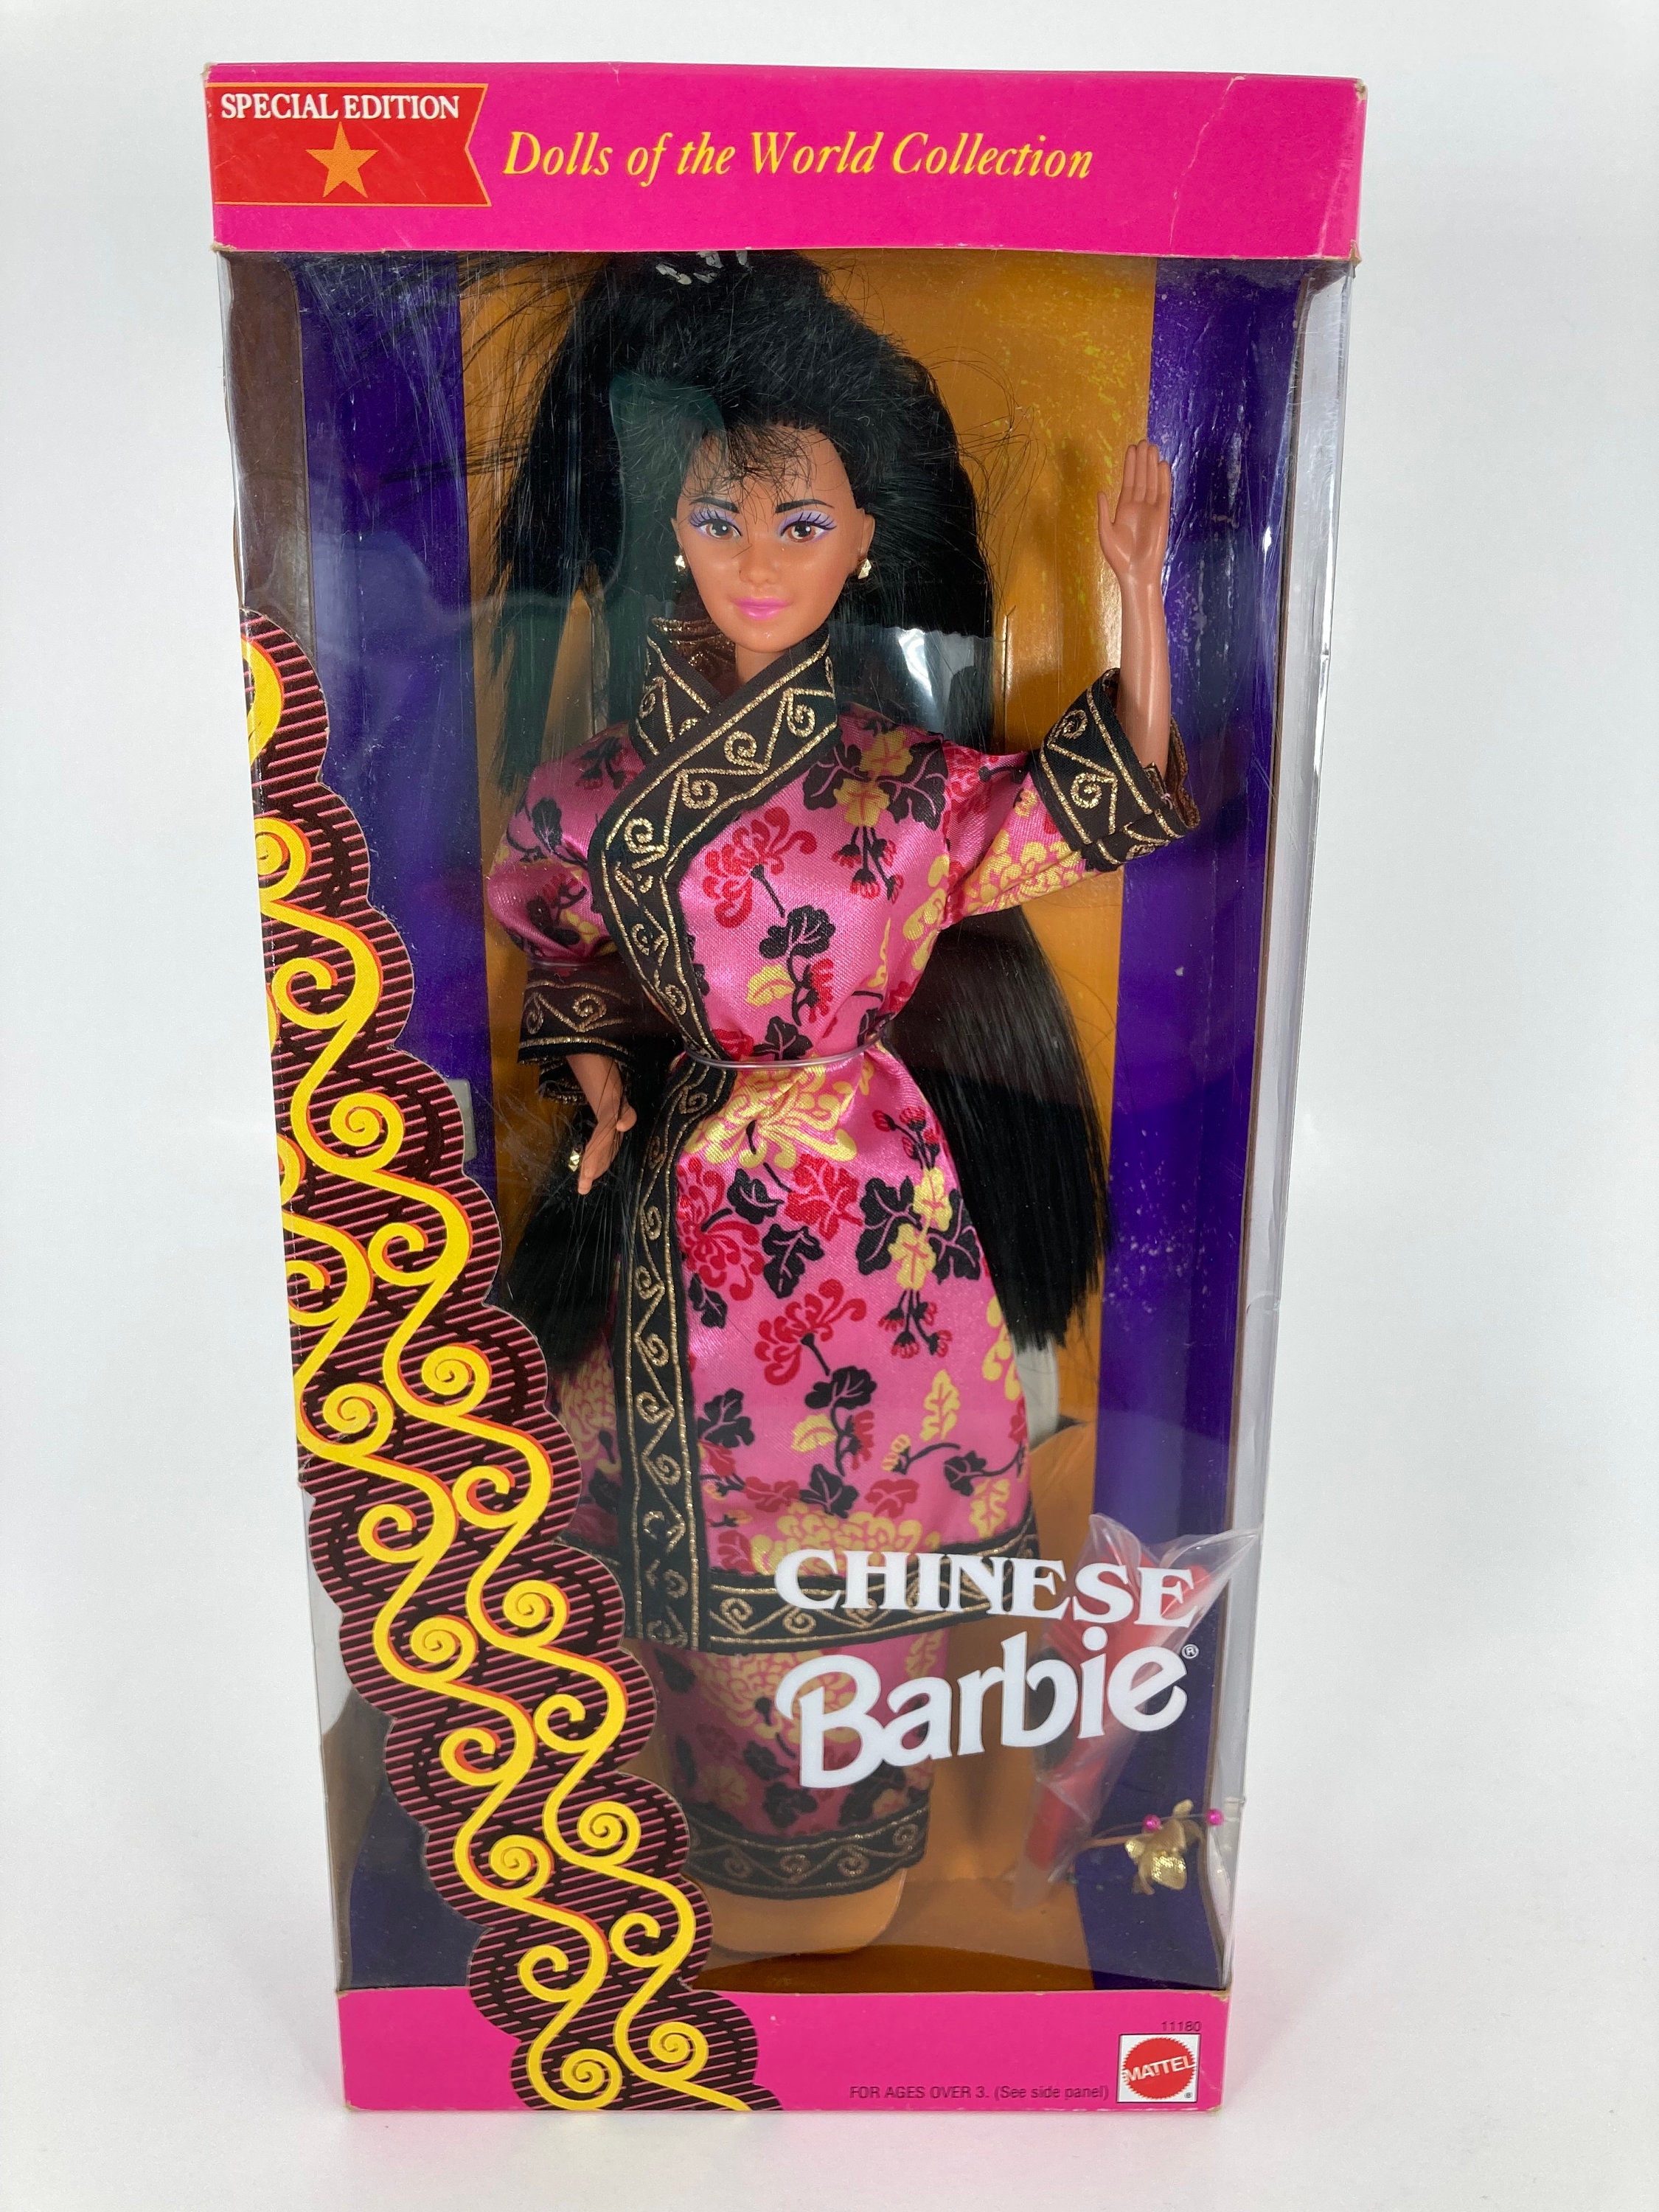 1993 Chinese Barbie-dolls of the World Collection